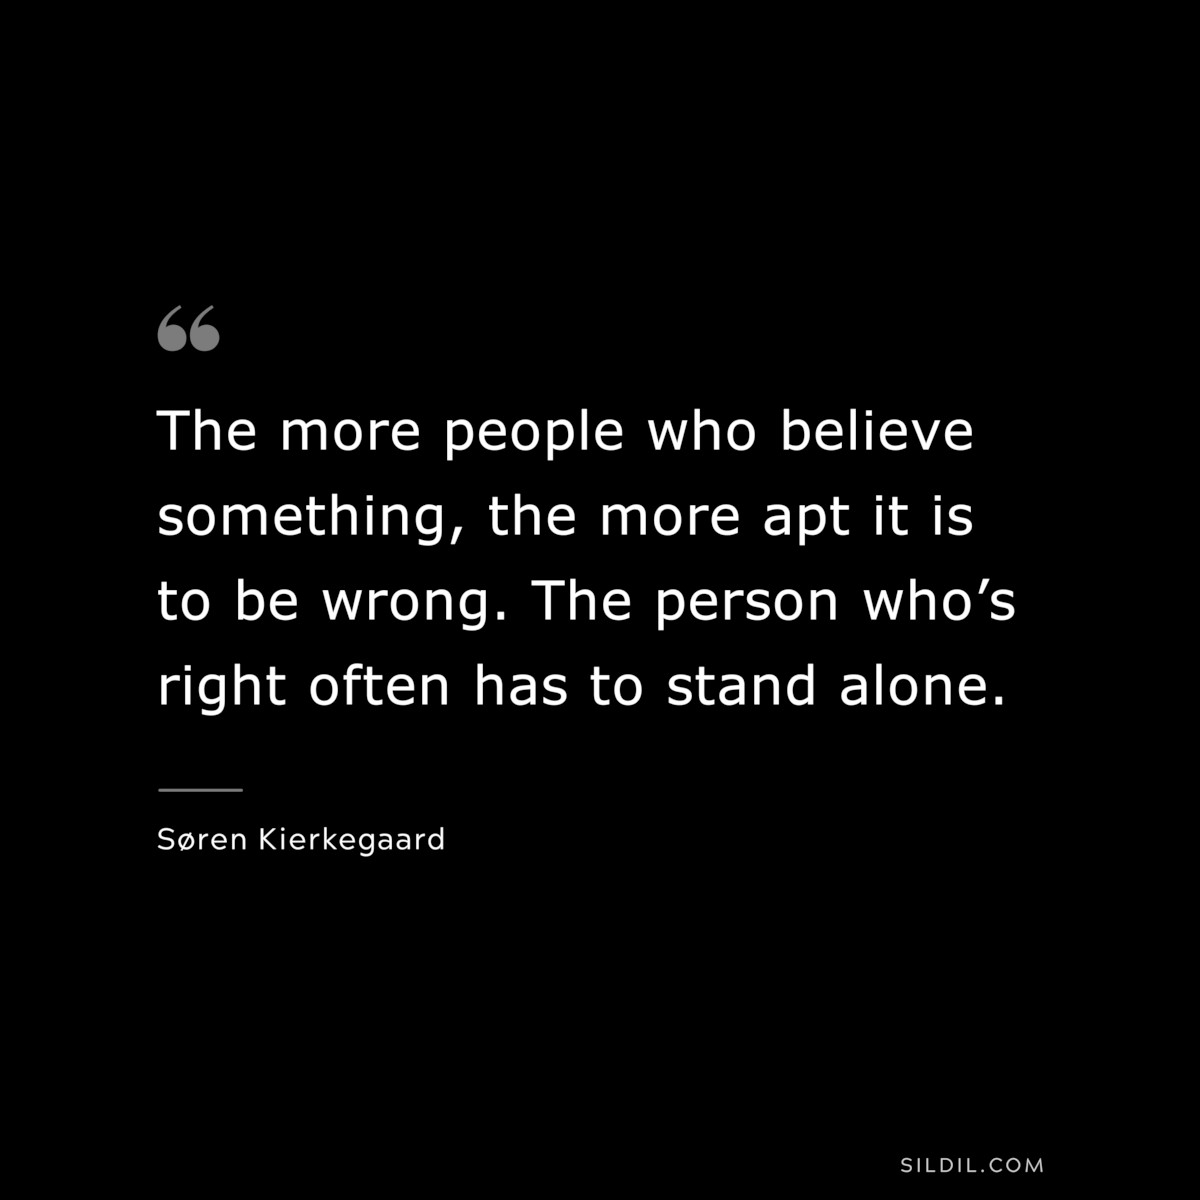 The more people who believe something, the more apt it is to be wrong. The person who’s right often has to stand alone. ― Søren Kierkegaard